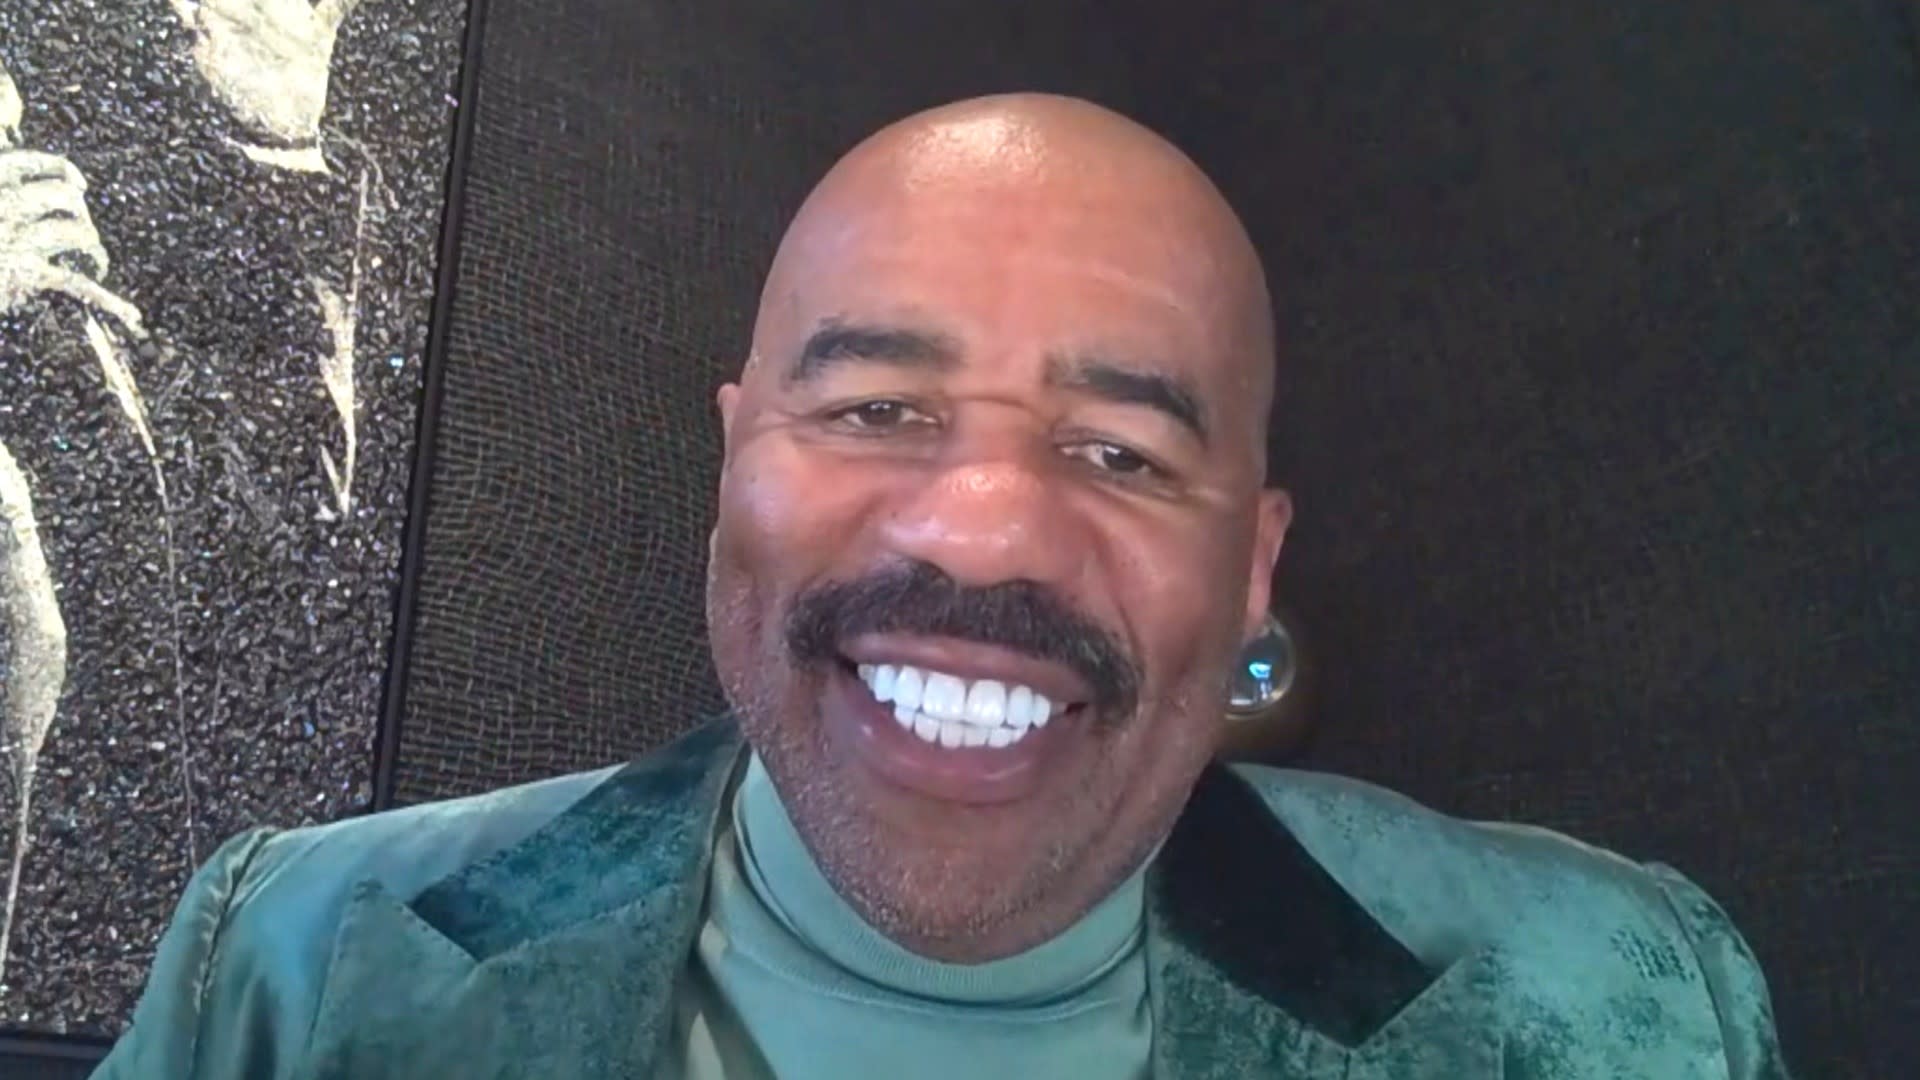 You Were Willing to Get In That Fox Hole and Grow with Me': Steve Harvey  Gifts Wife Marjorie a Written Love Letter Before Their Wedding Anniversary